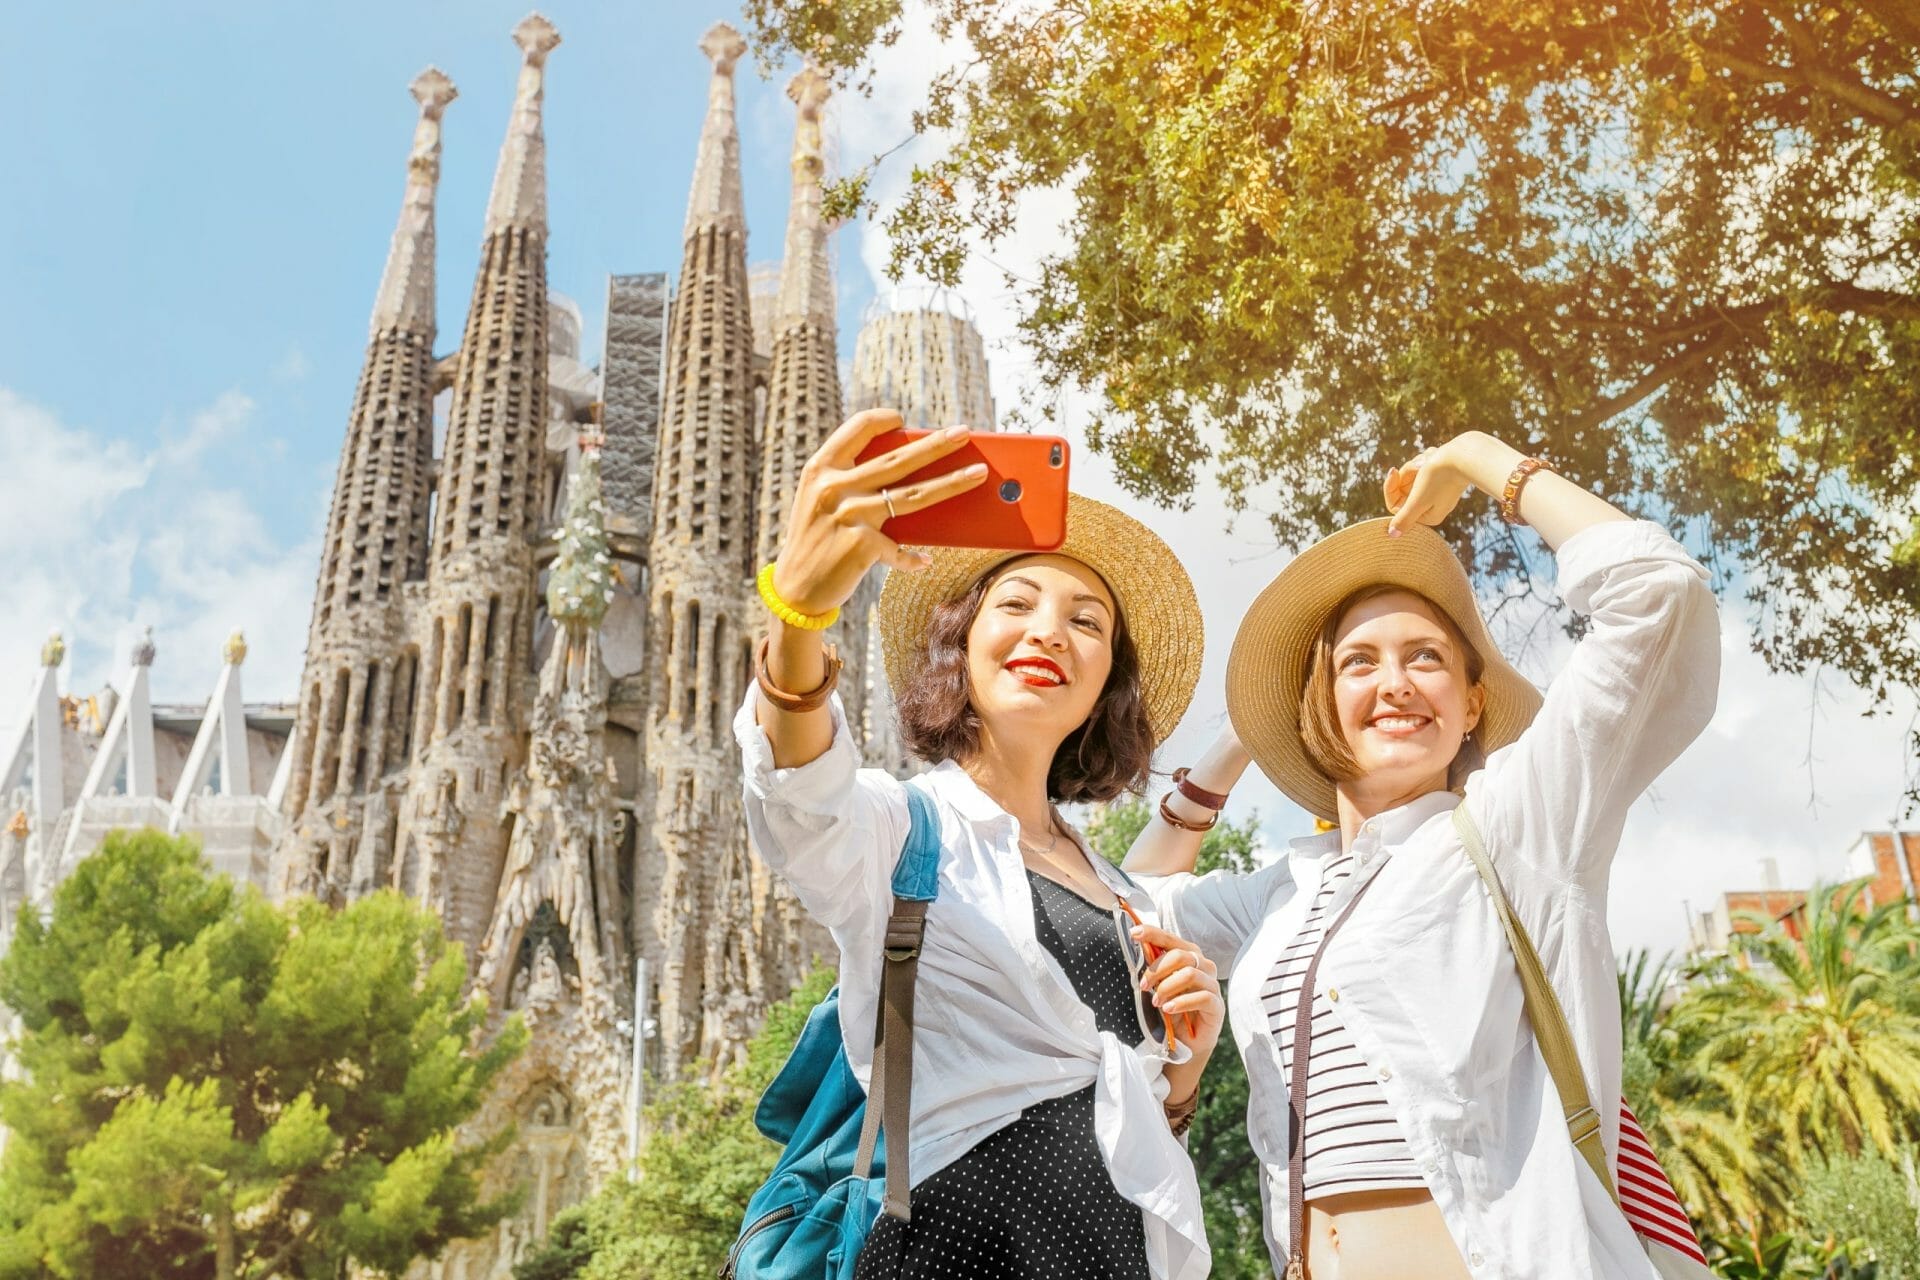 Barcelona, Spain Friends Making Selfie Photo On Her Smartphone In Front Of The Famous Sagrada Familia Catholic Cathedral. Travel In Barcelona Concept